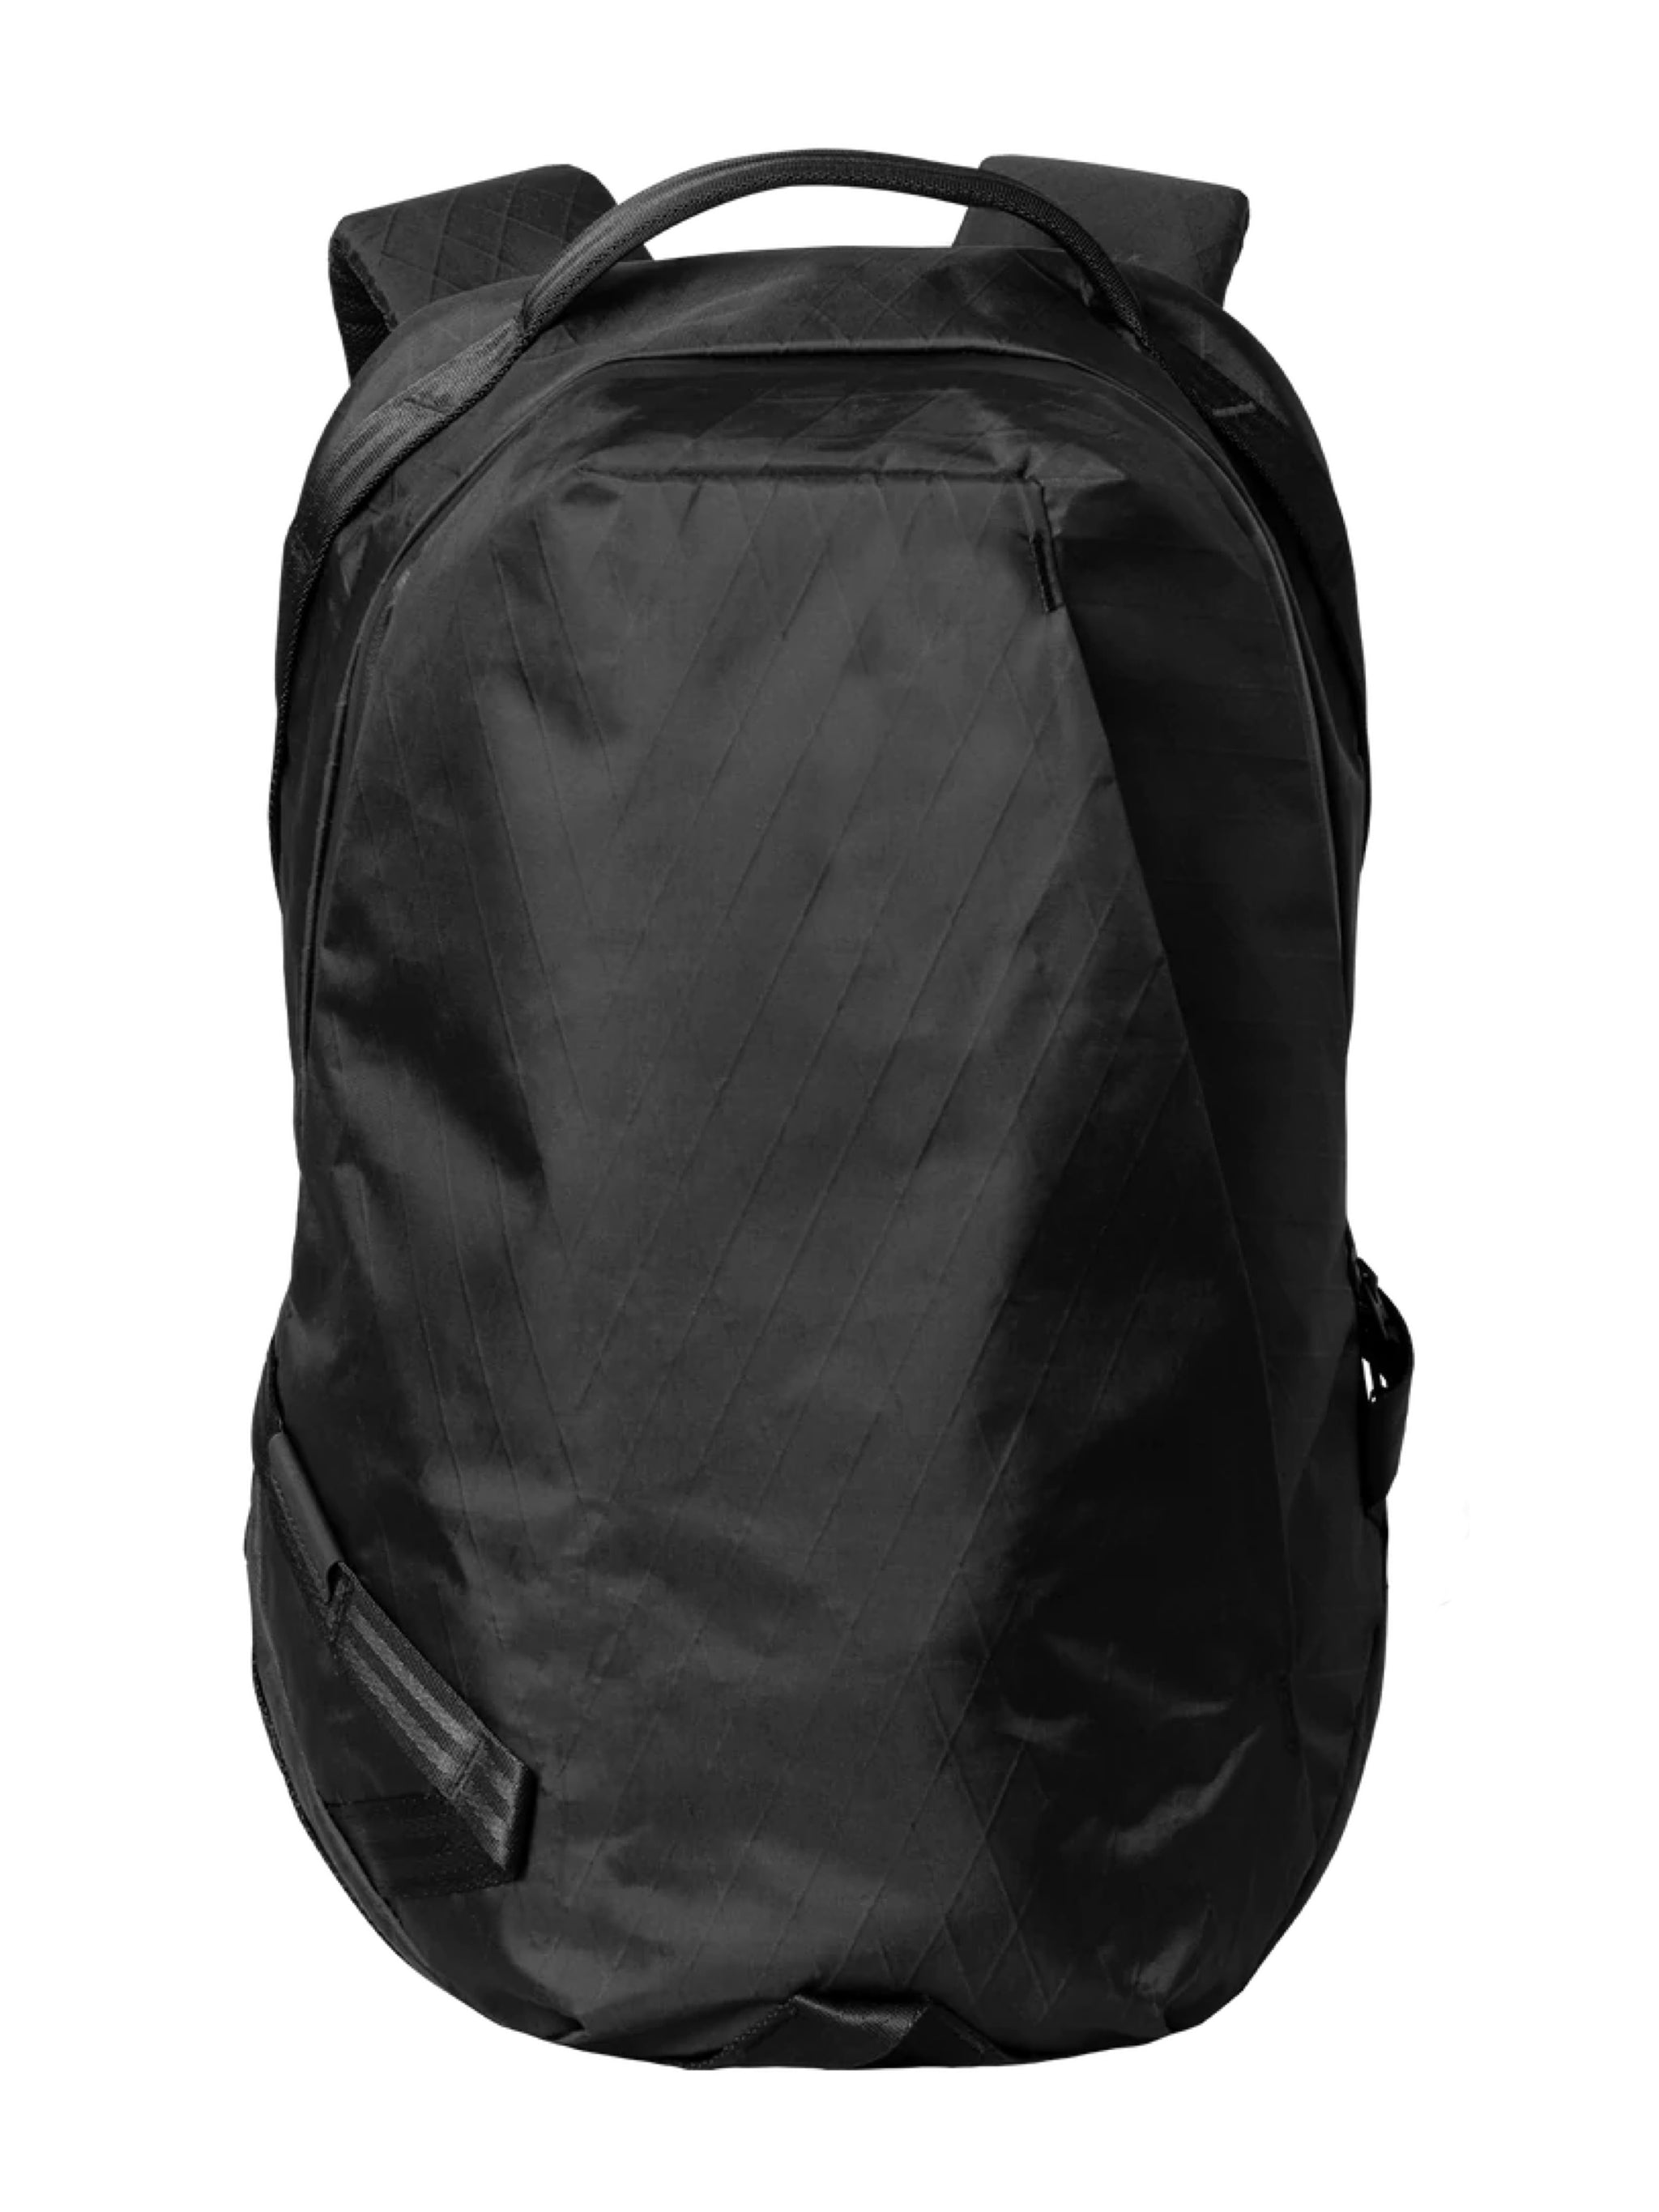 Able Carry Daily Backpack XPAC Deep Black - MORE by Morello Indonesia